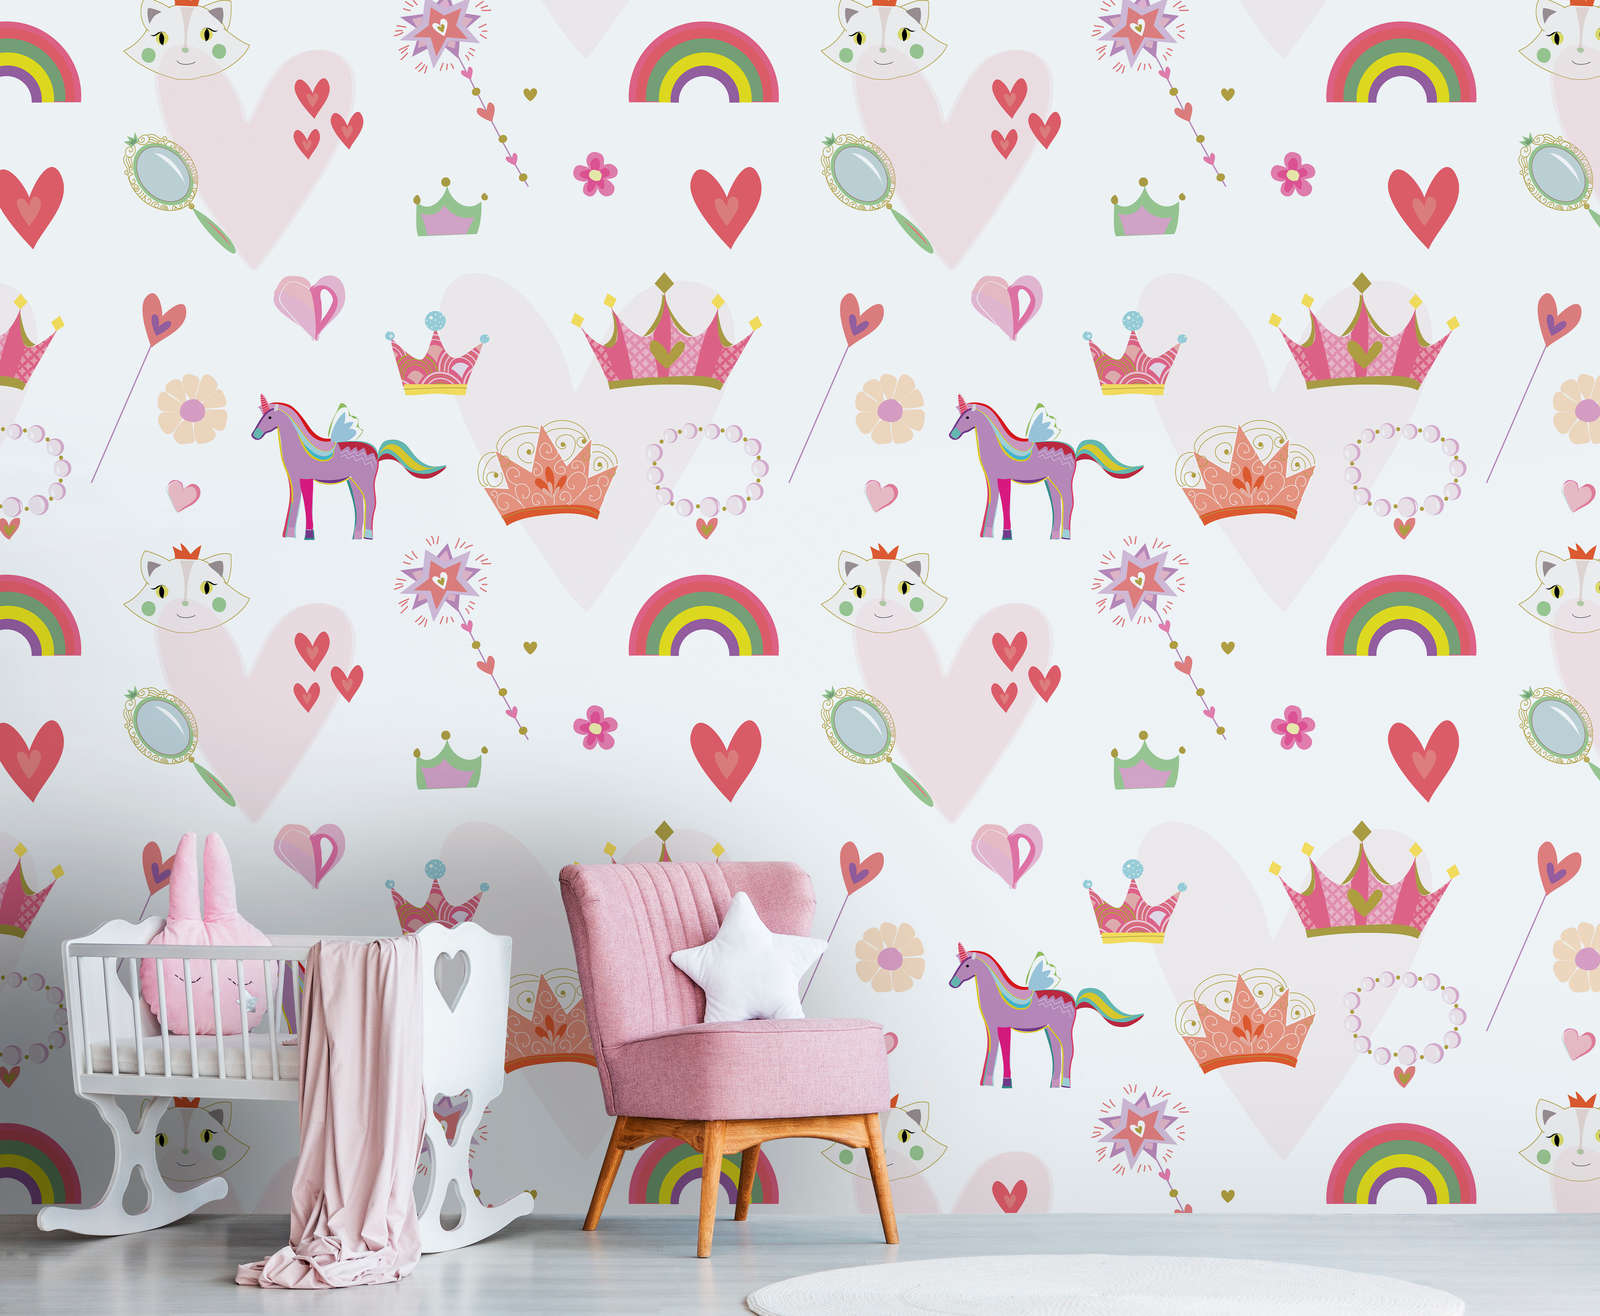             Children's wallpaper in princess style with hearts and animals - colourful, pink, white
        